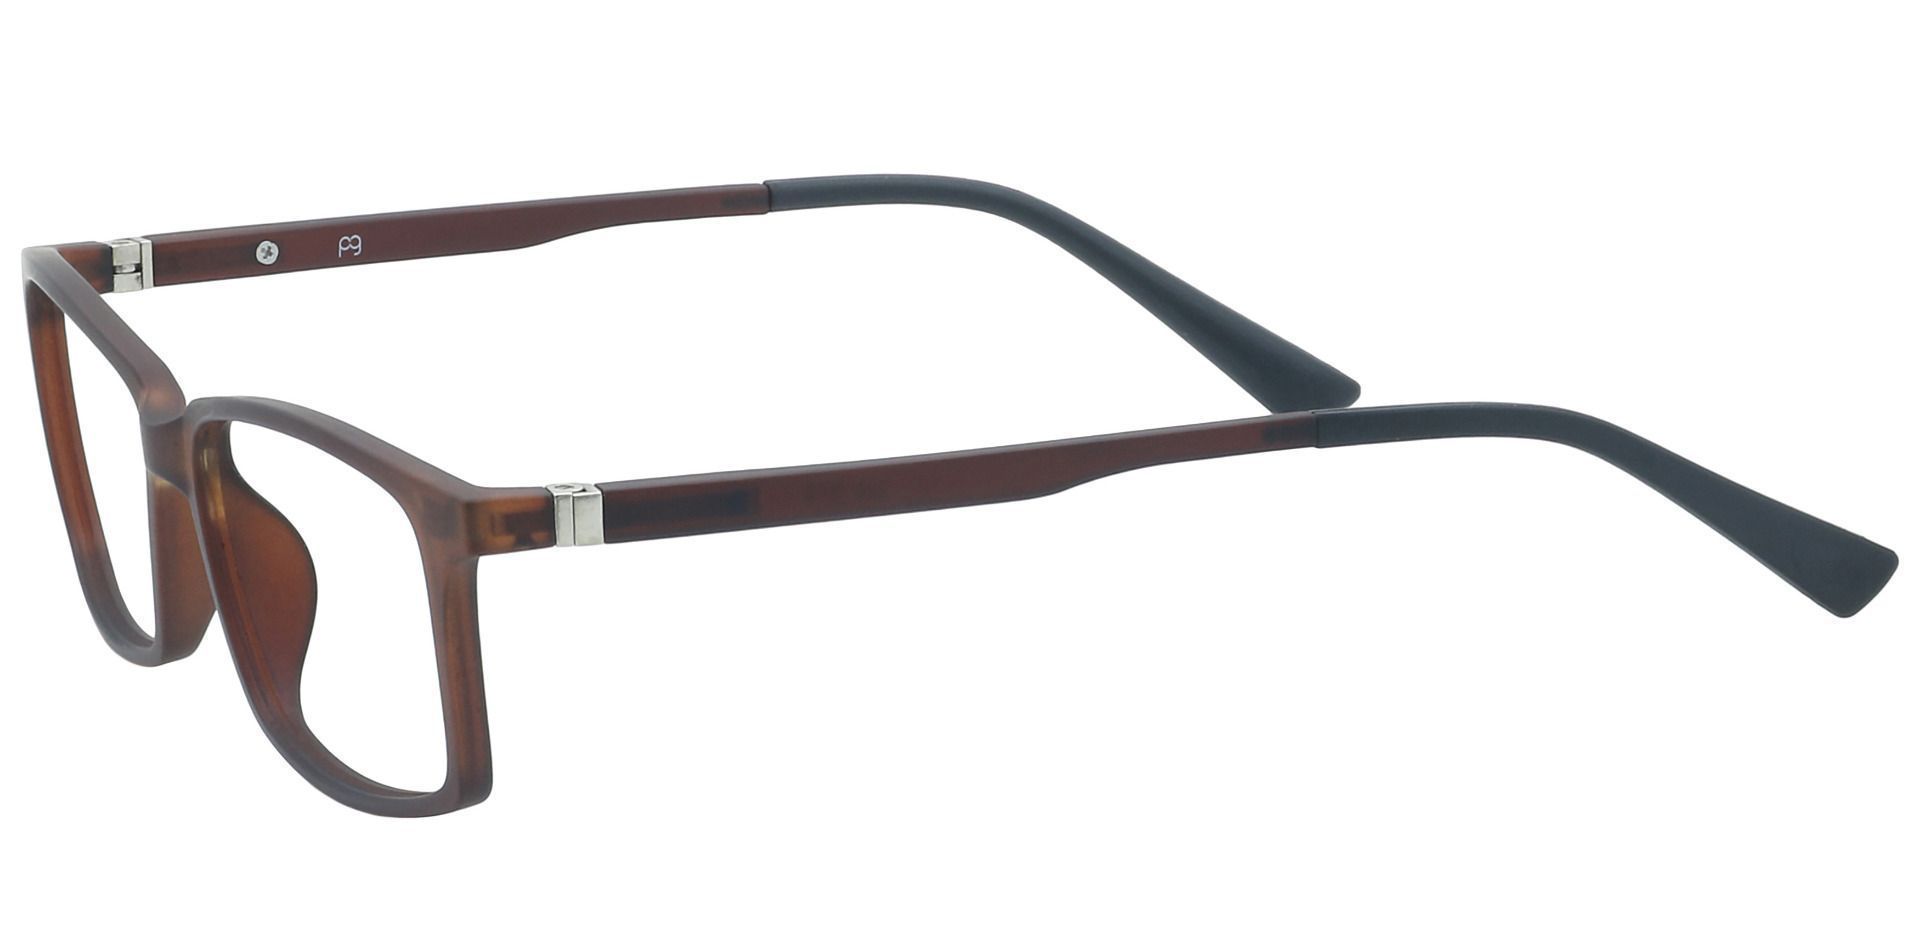 Tahoe Rectangle Reading Glasses - Brown